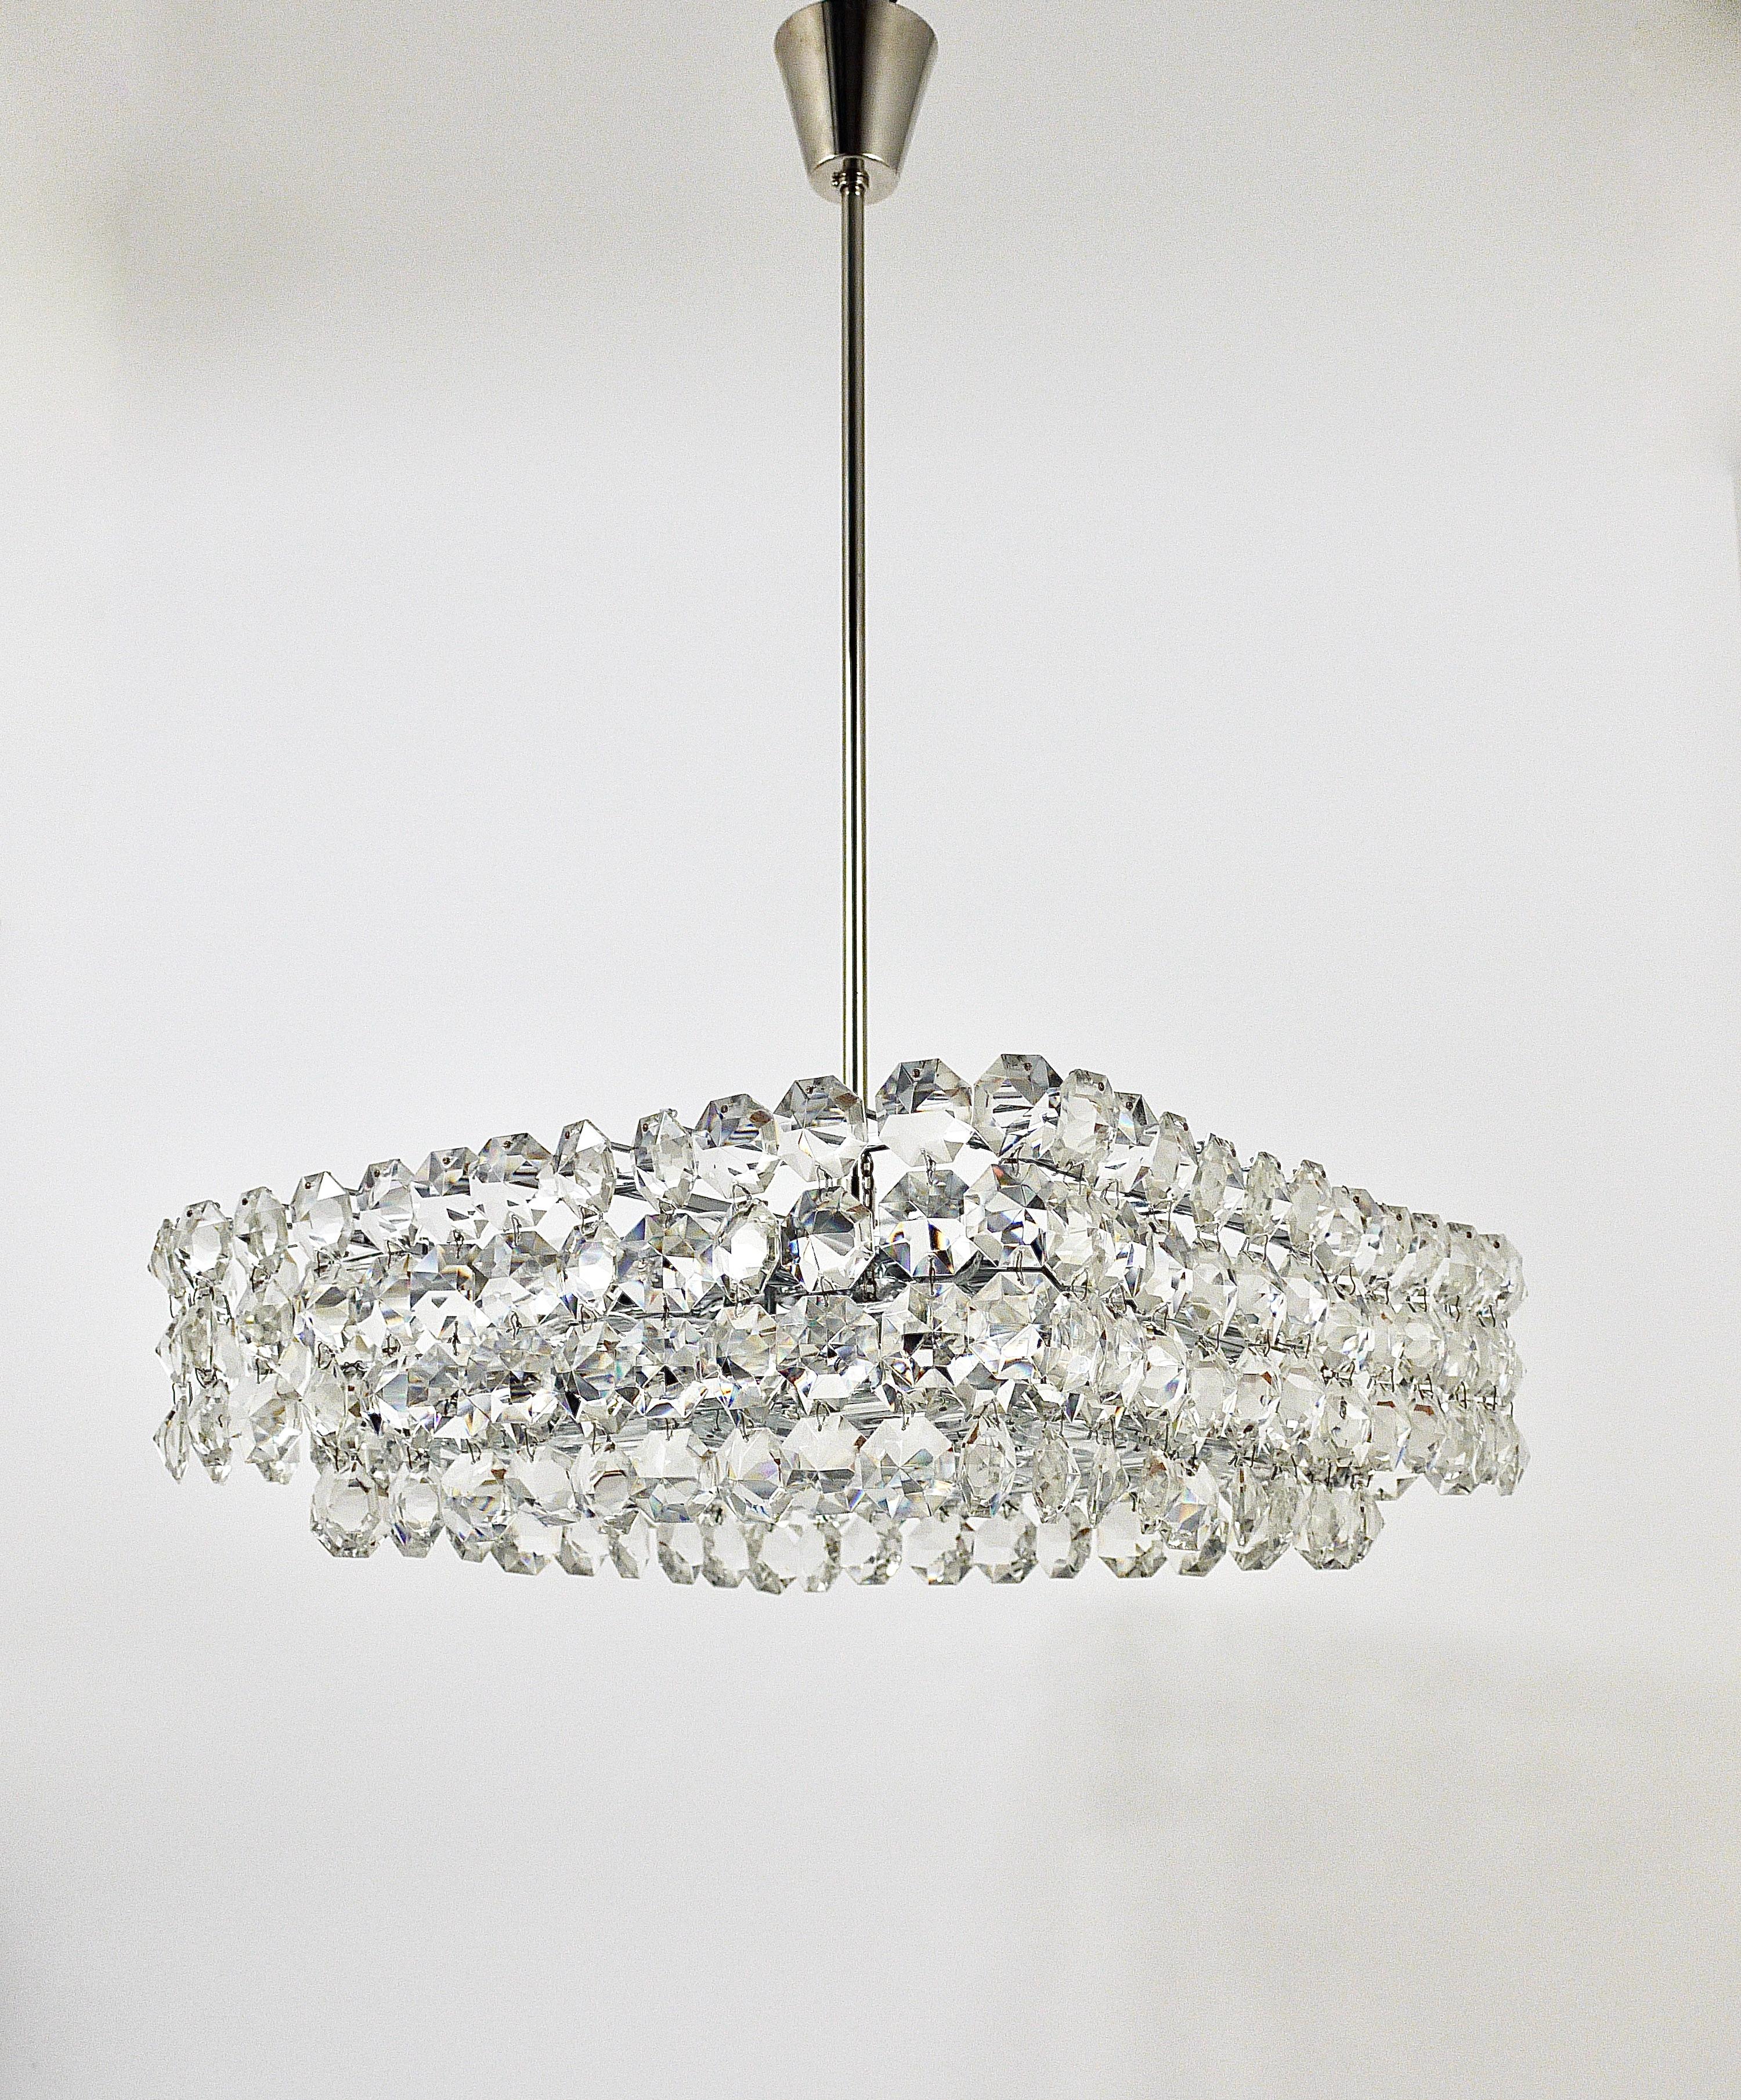 Large Square Bakalowits Chandelier with Diamond-Shaped Crystals, Austria, 1950s For Sale 7